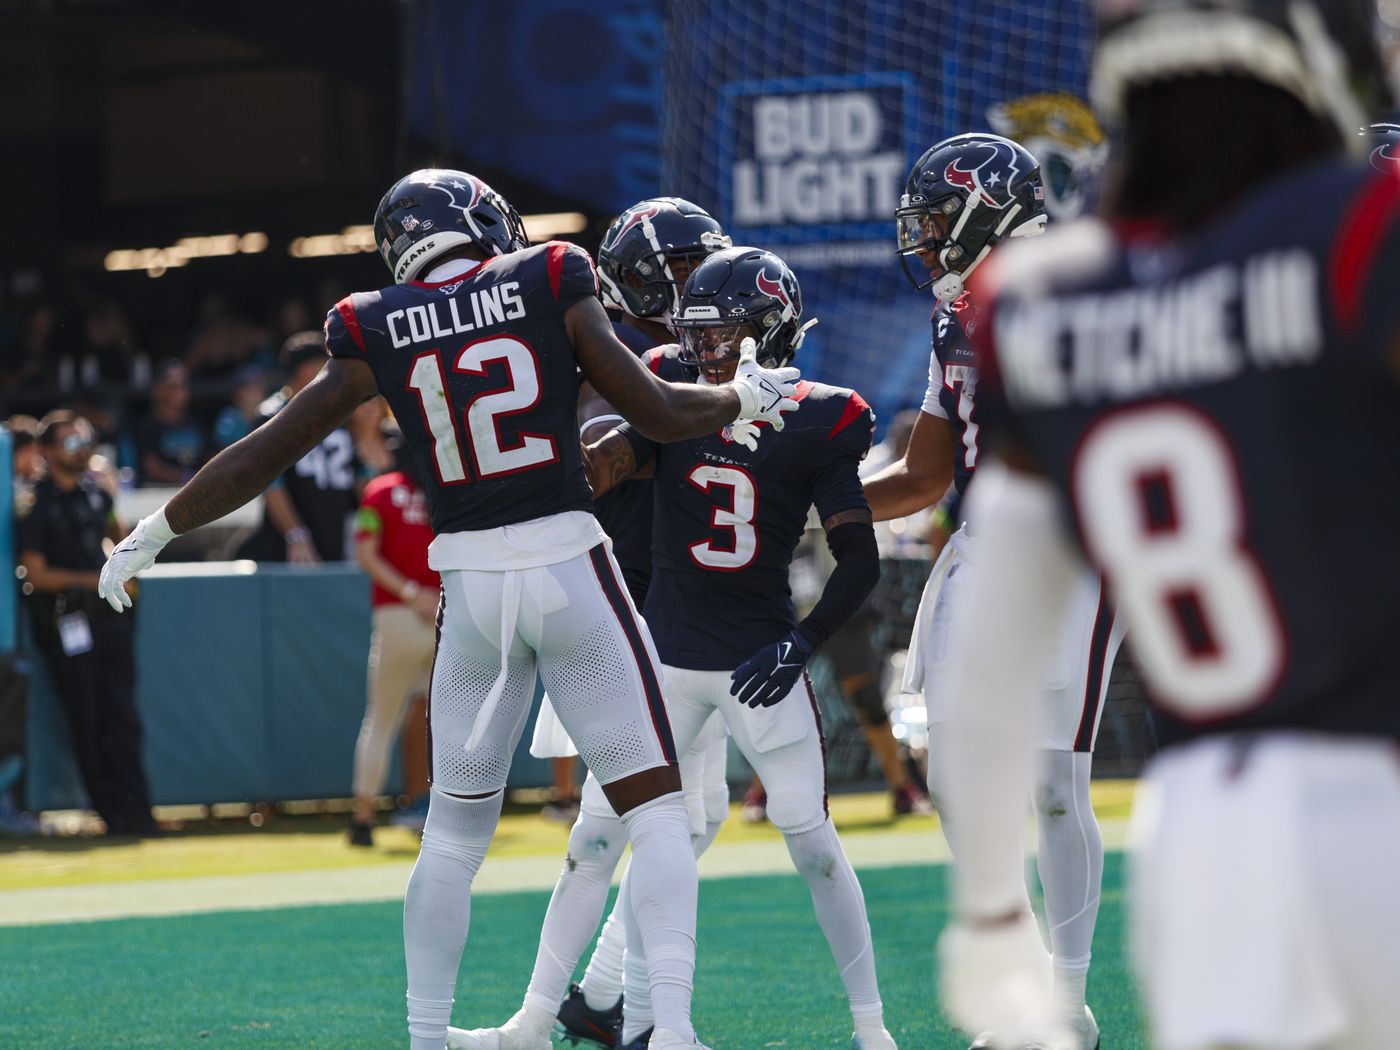 Houston Texans: Tank Dell will be the top player to watch in Week 4